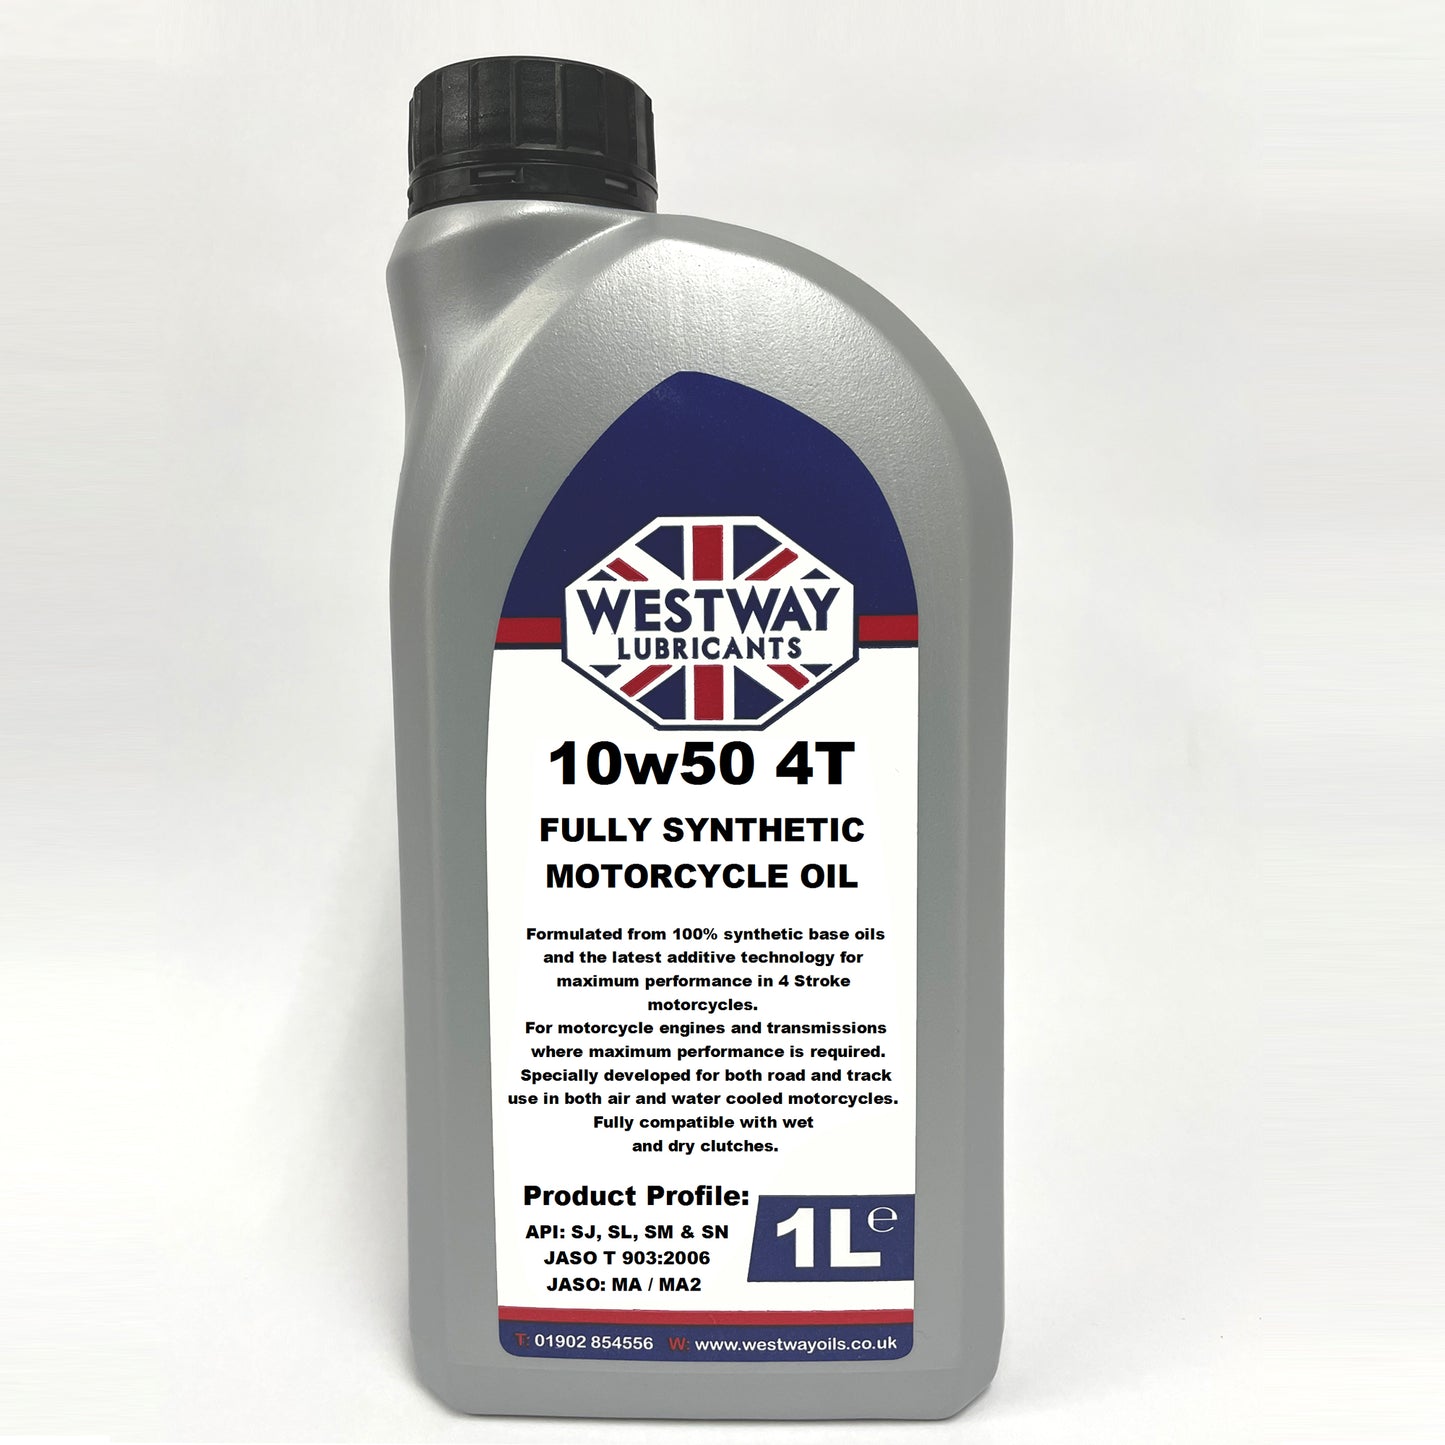 10w50 4T Fully Synthetic Motorcycle Oil